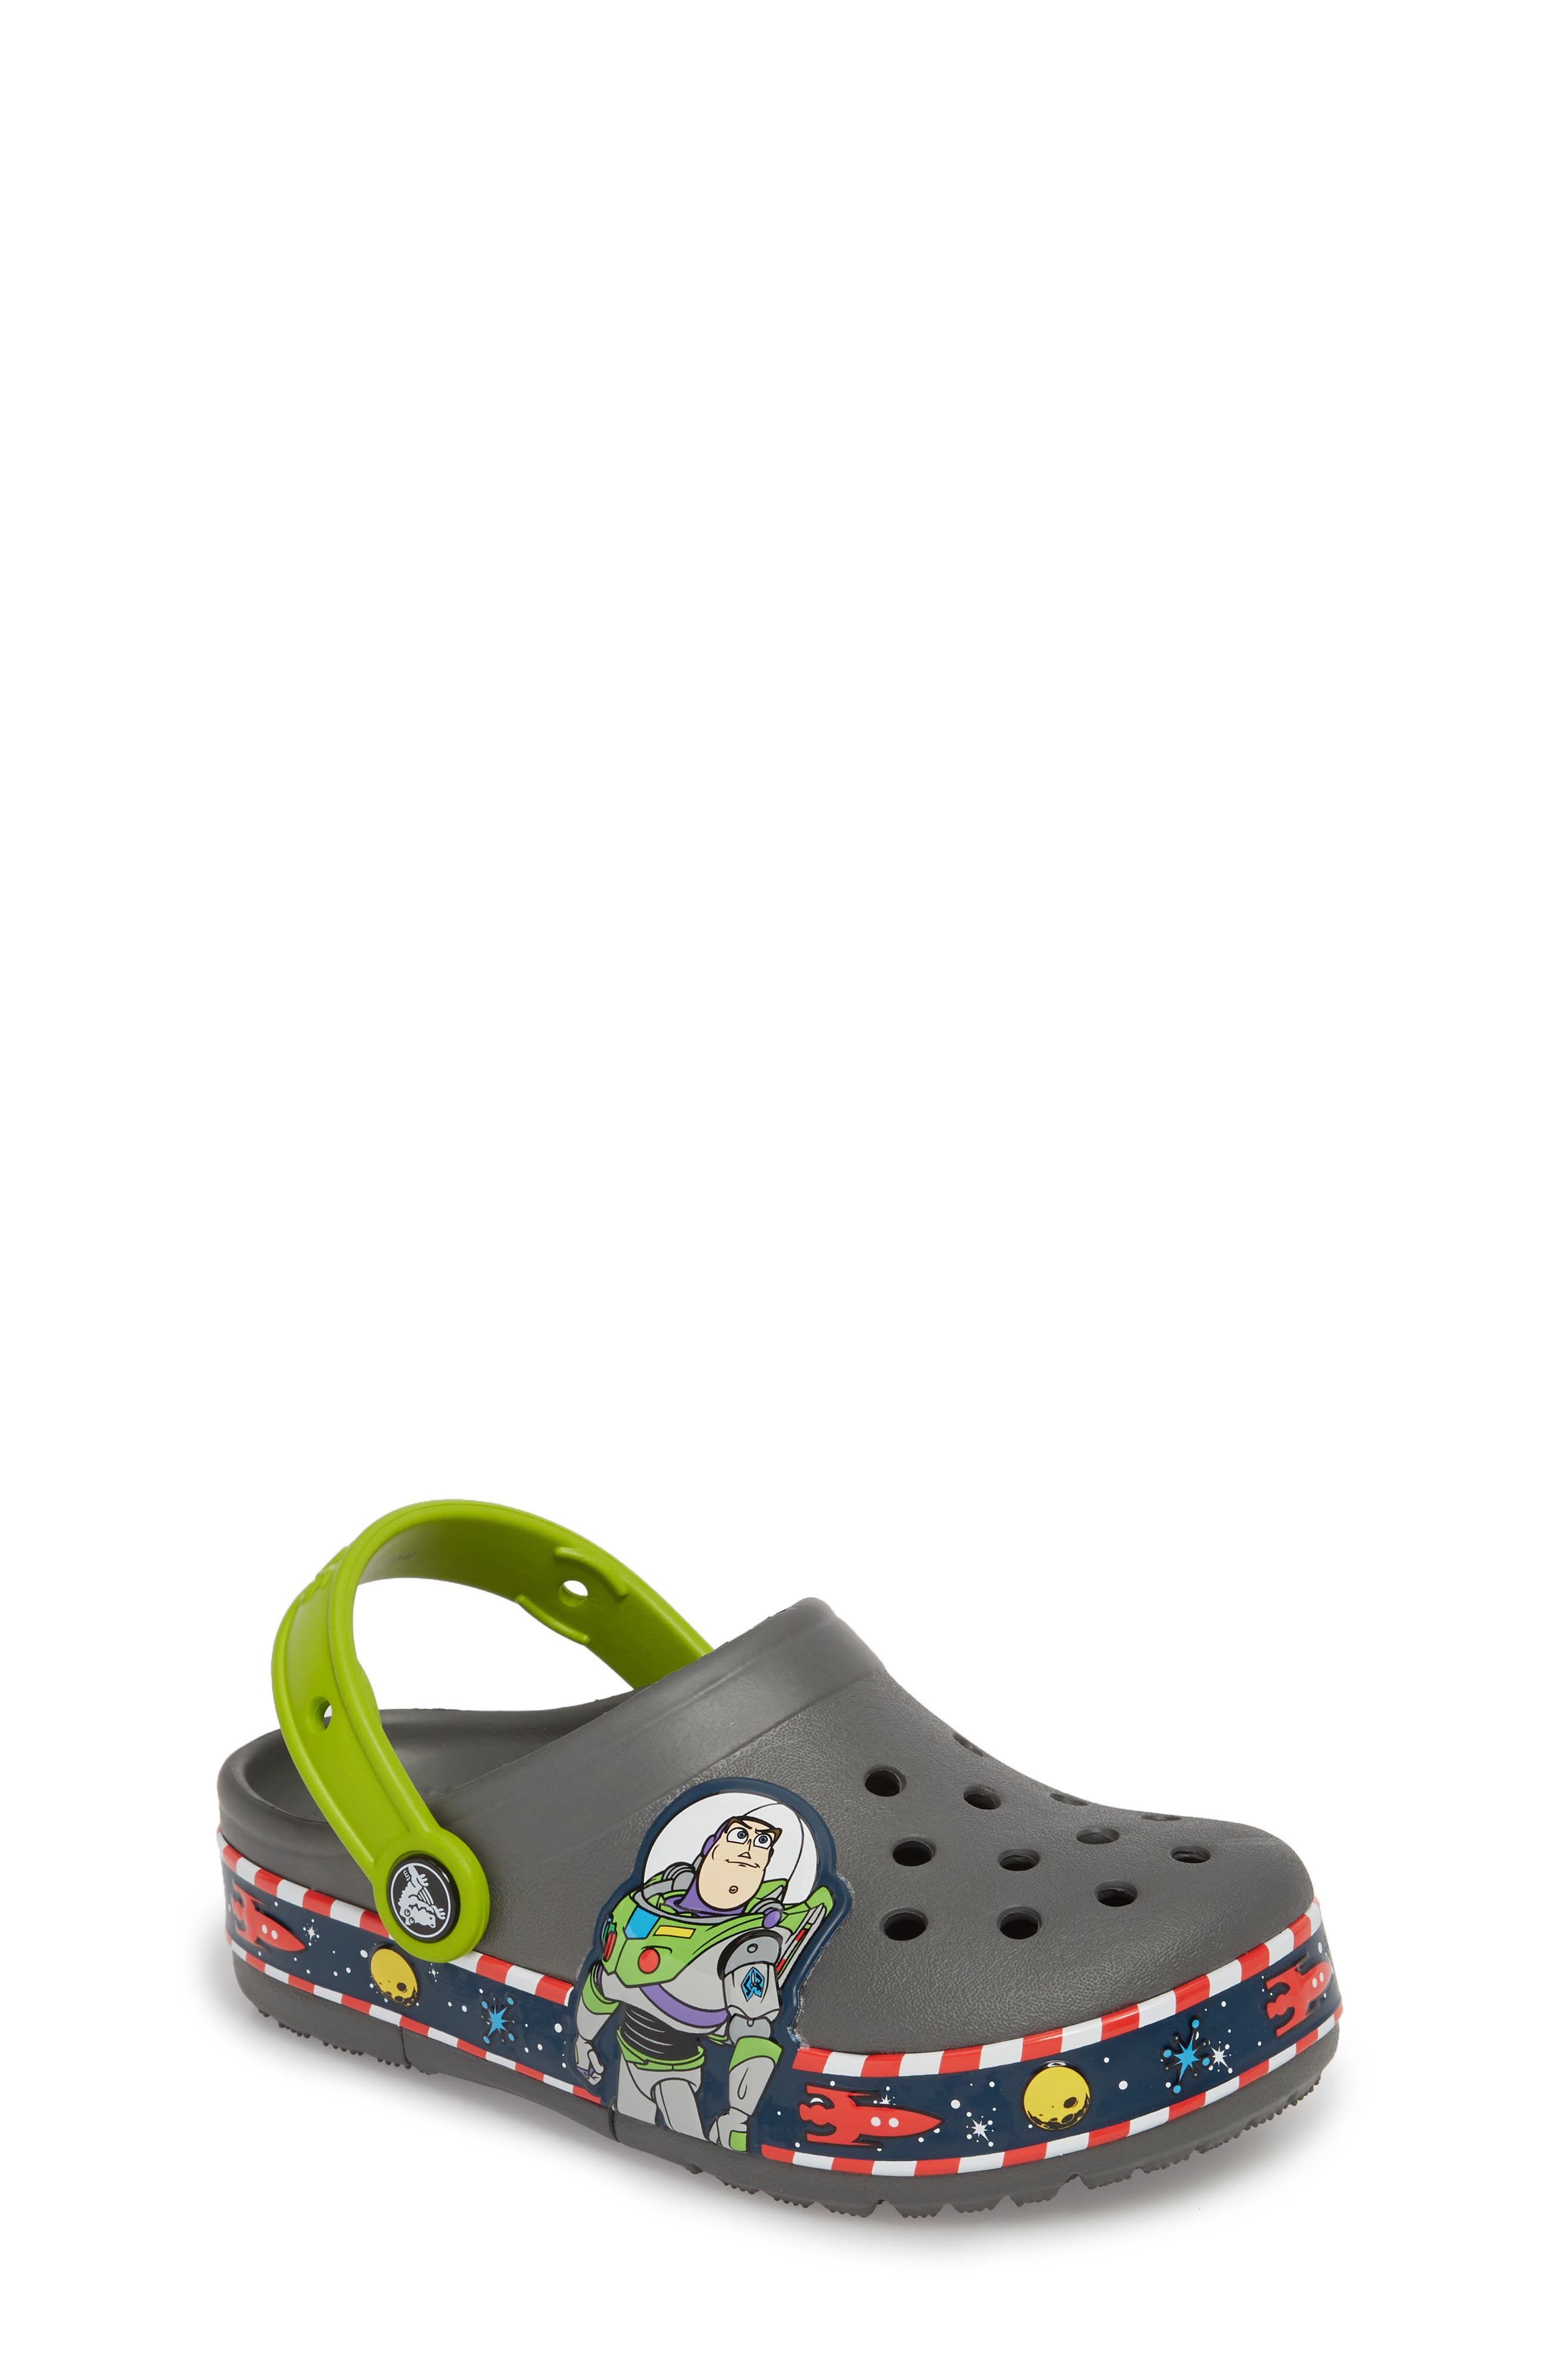 buzz lightyear slippers toddlers